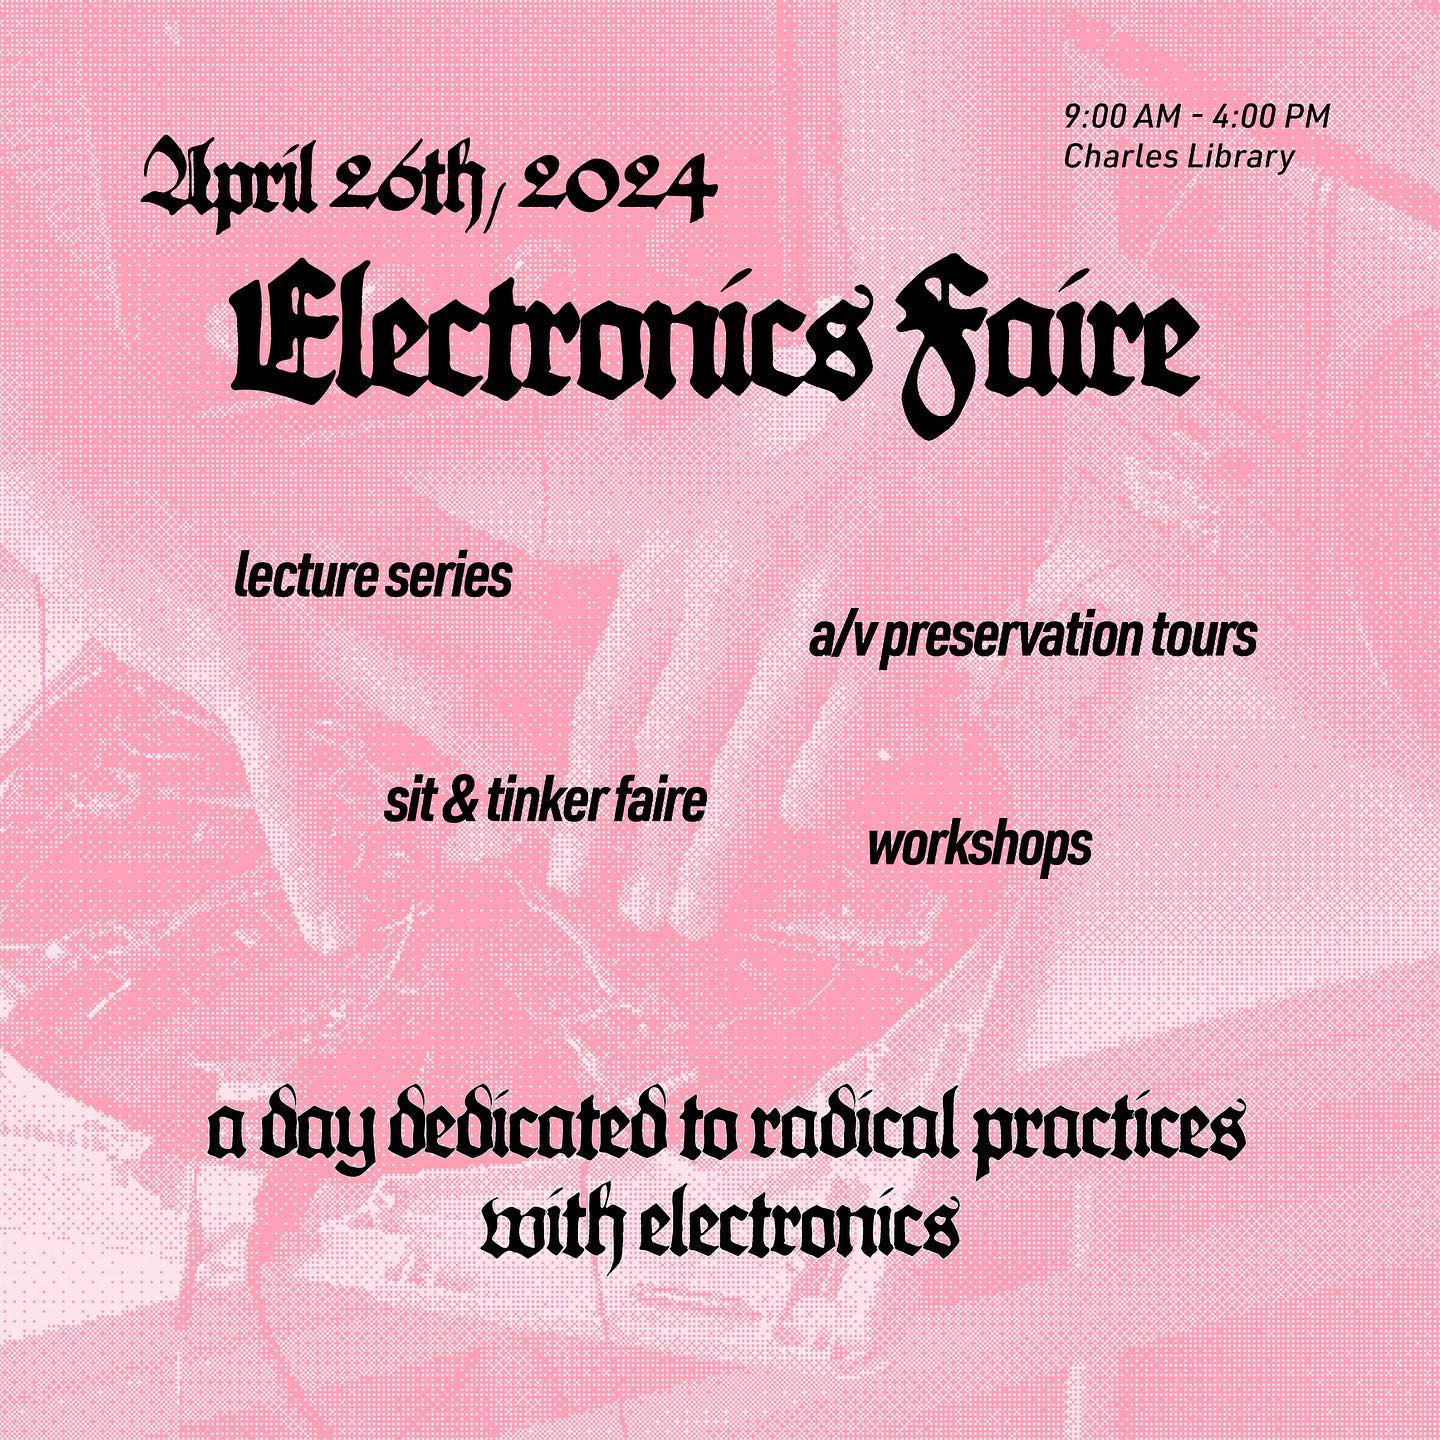 Flyer with a pink-tinted, heavily compressed photo of hands touching electronics circuits, with the following text overlaid: April 26th, 2024 Electronics Faire 9:00 AM – 4:00 PM Charles Library lecture series a/v preservation tours sit & tinker faire workshops a day dedicated to radical practices with electronics